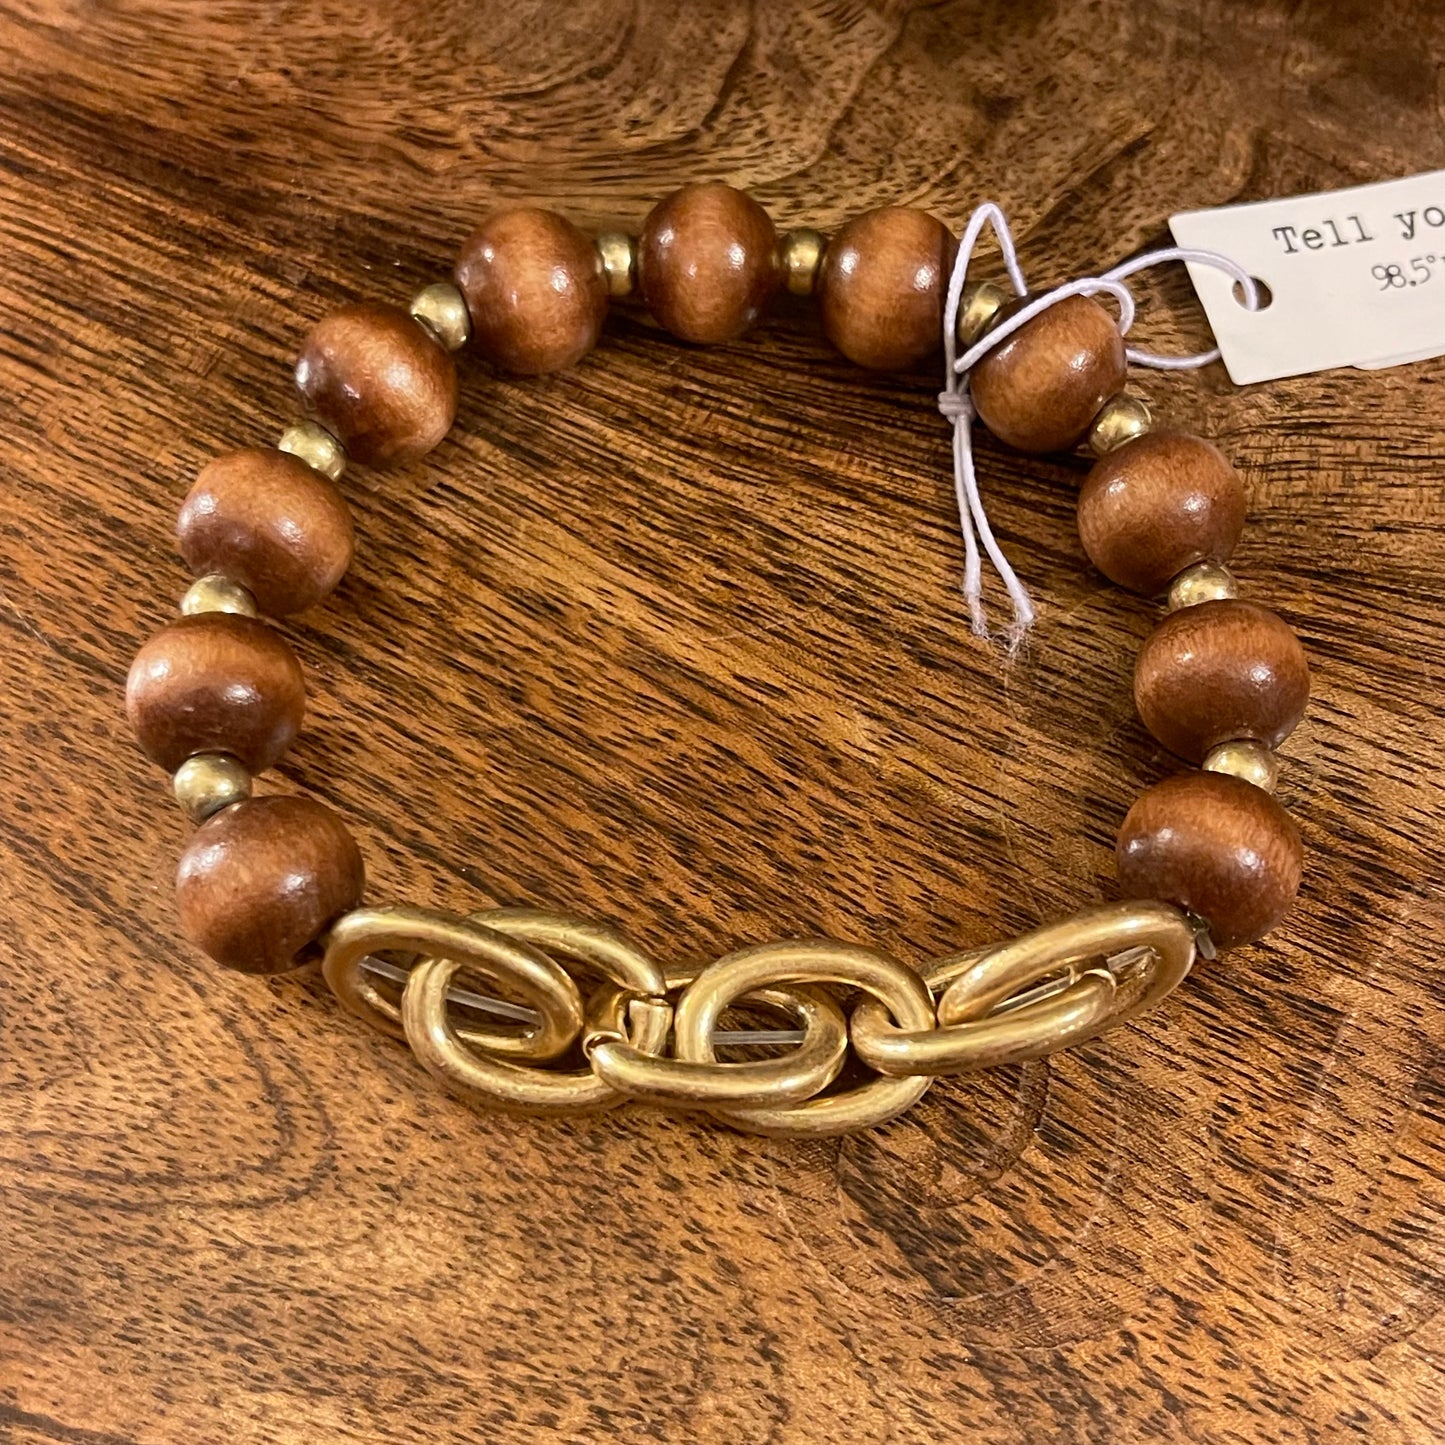 Bracelets- Beaded Wood Stretch Bracelet with Chainlink Accent